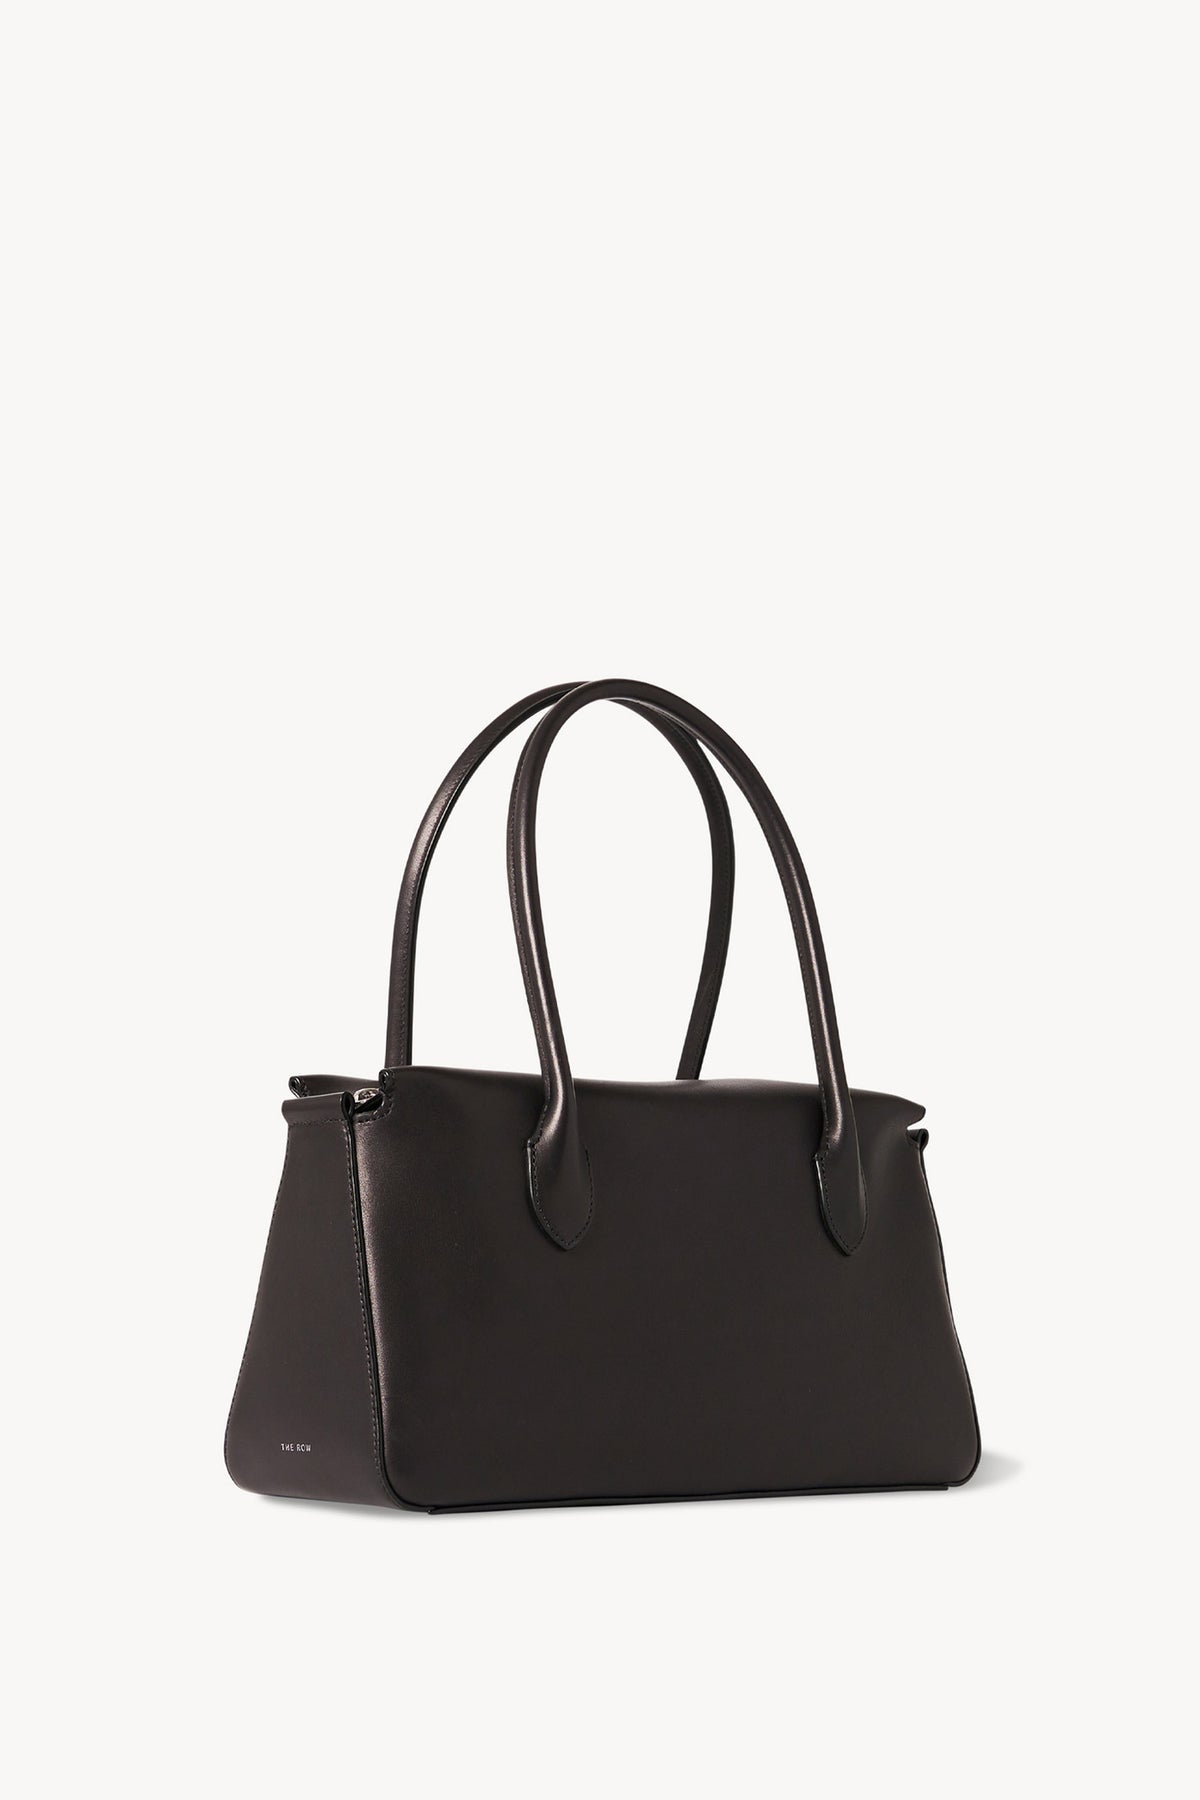 E/W Top Handle Bag in Leather